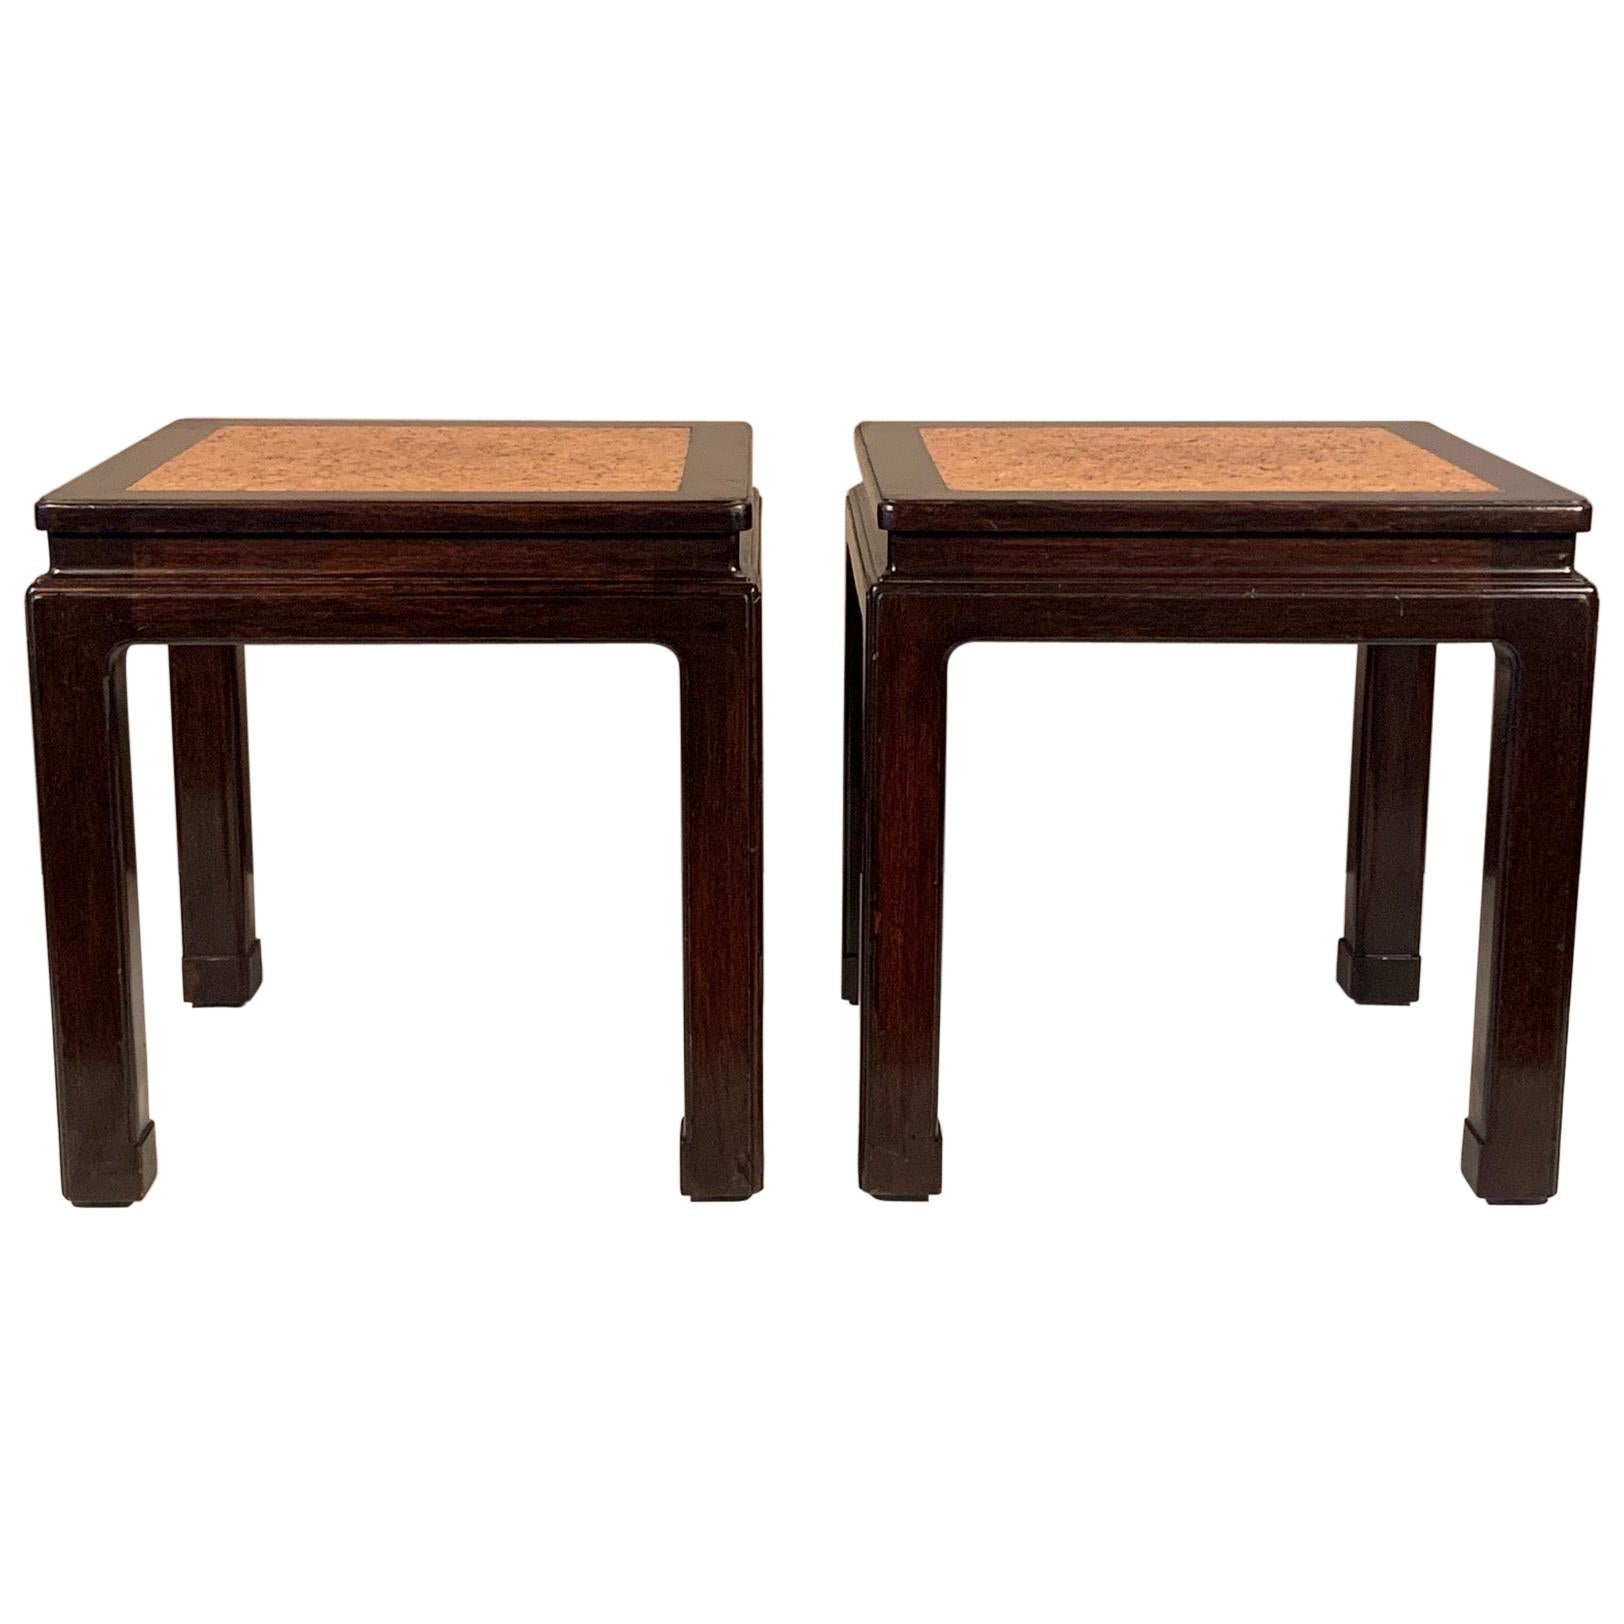 A Pair of Dunbar Occasional Tables Asian Style with Cork Tops